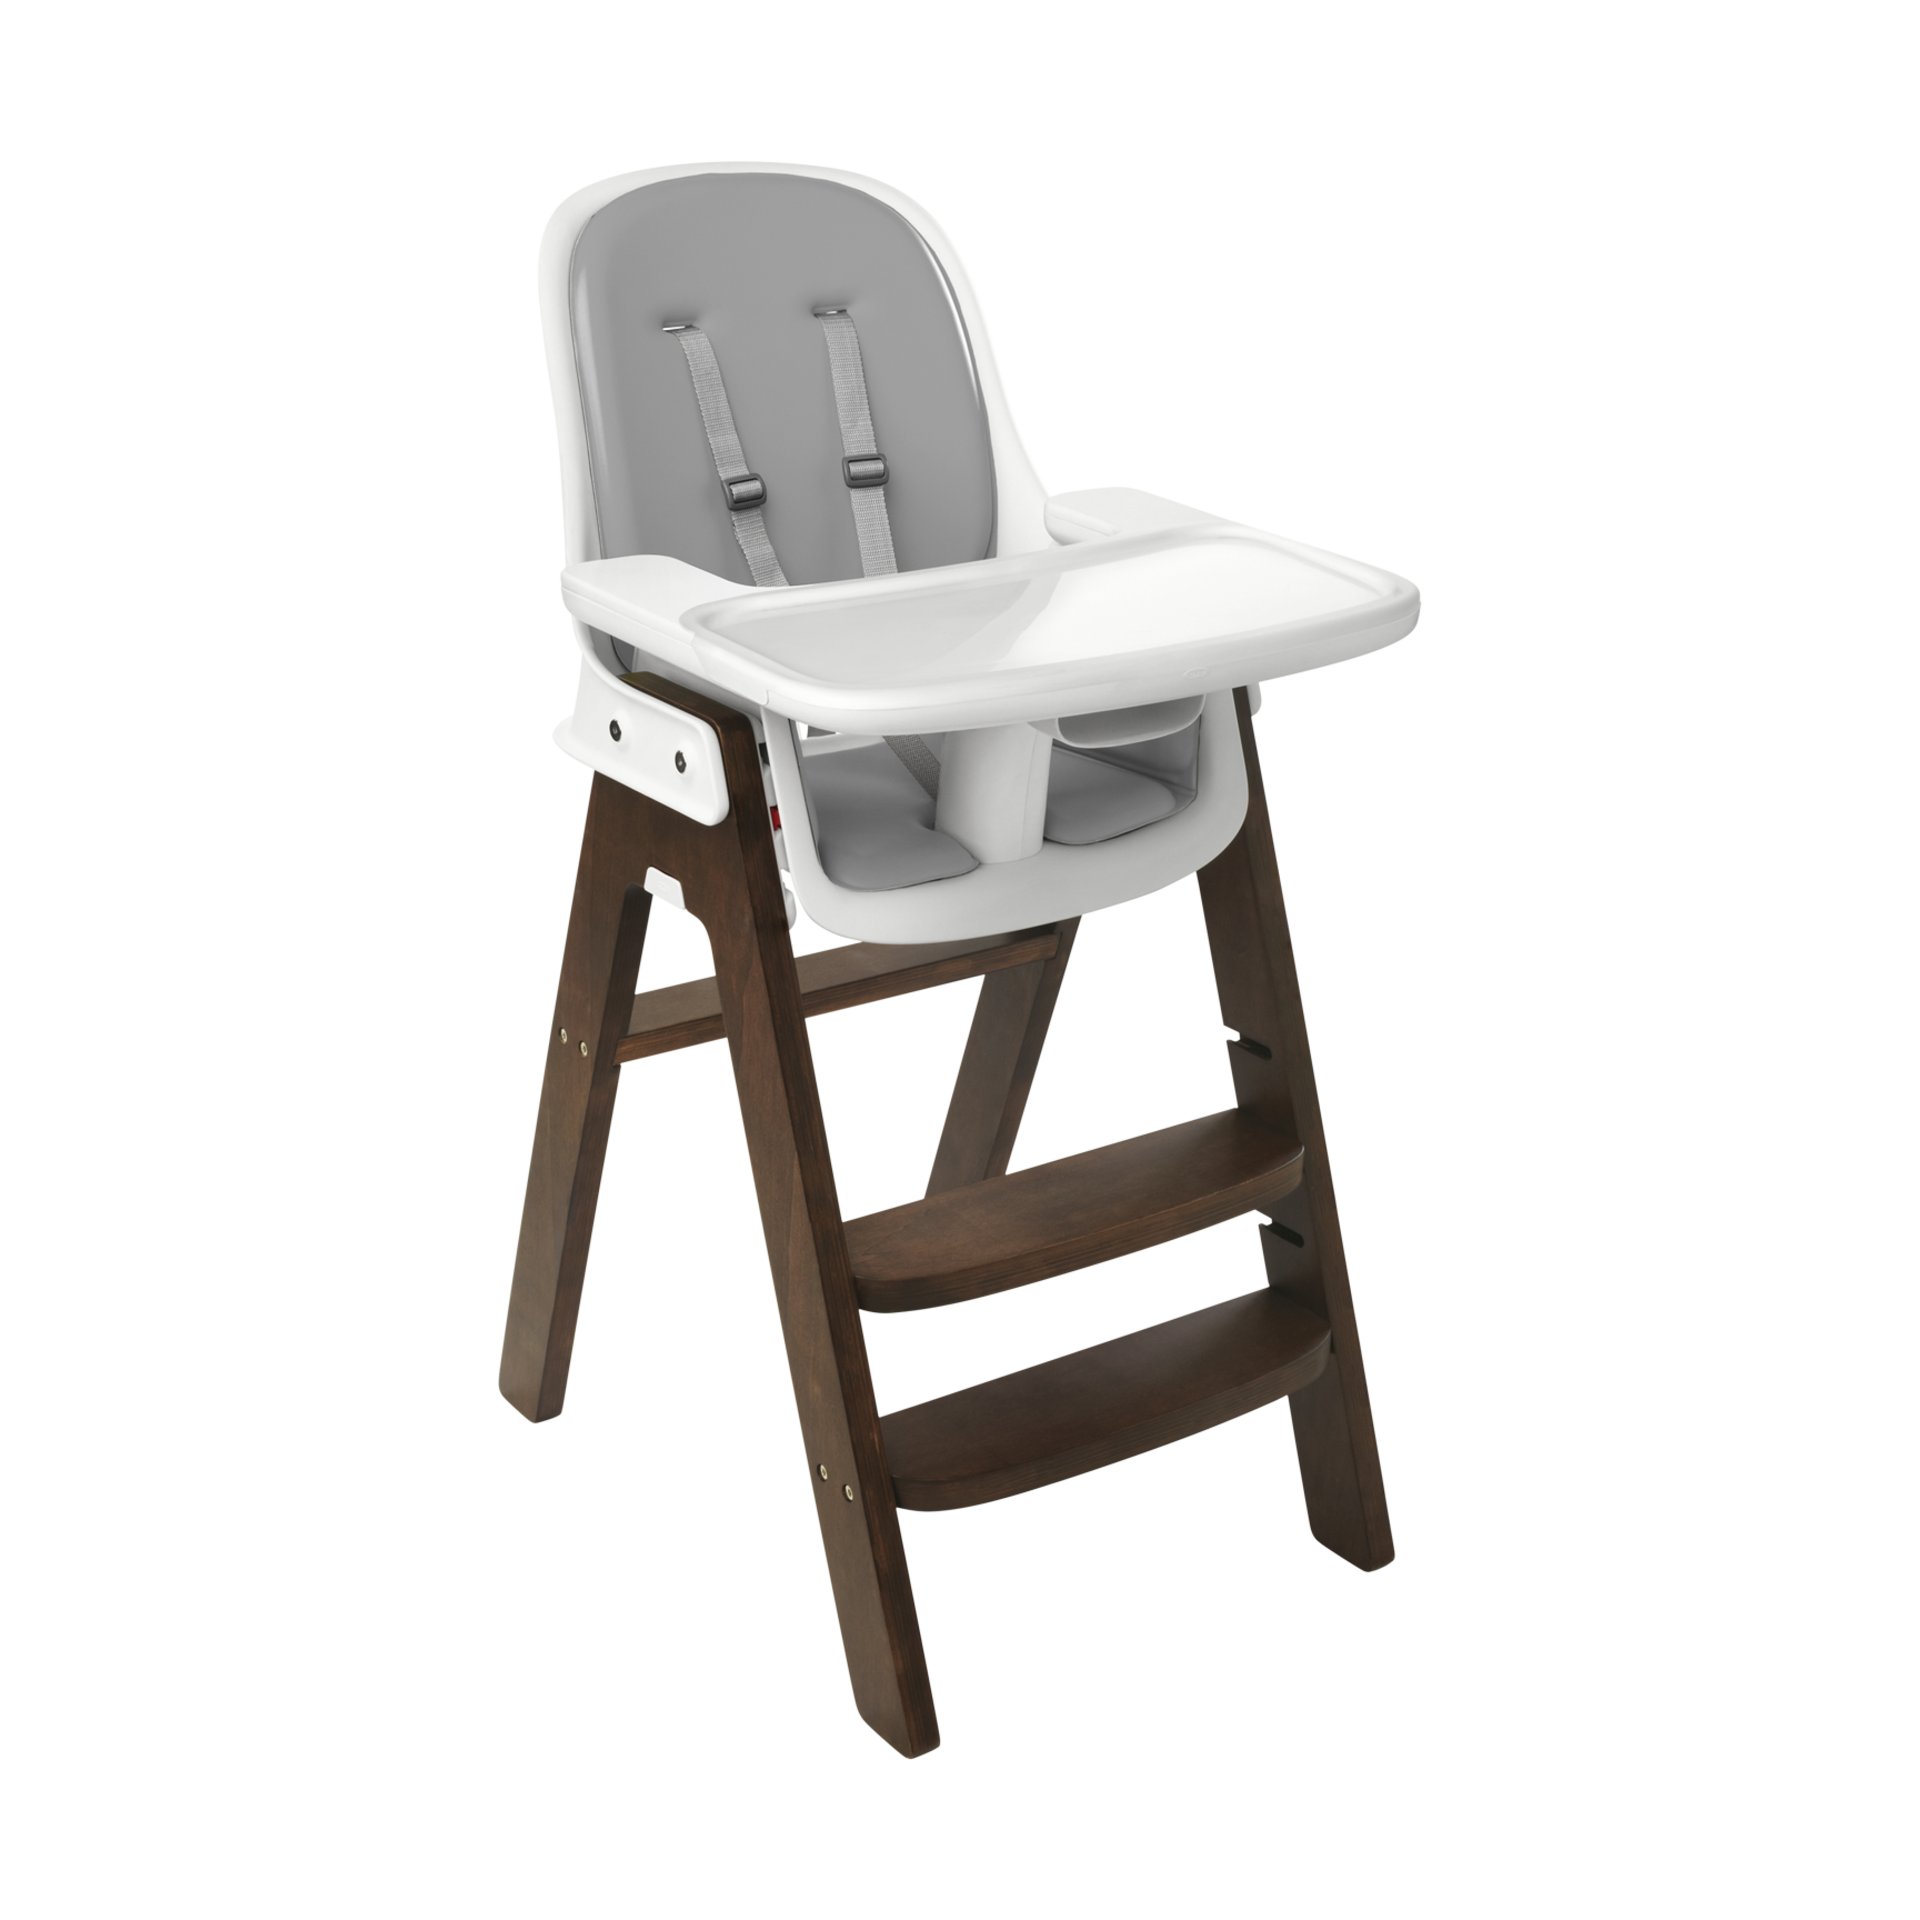 chairs for 4 year olds